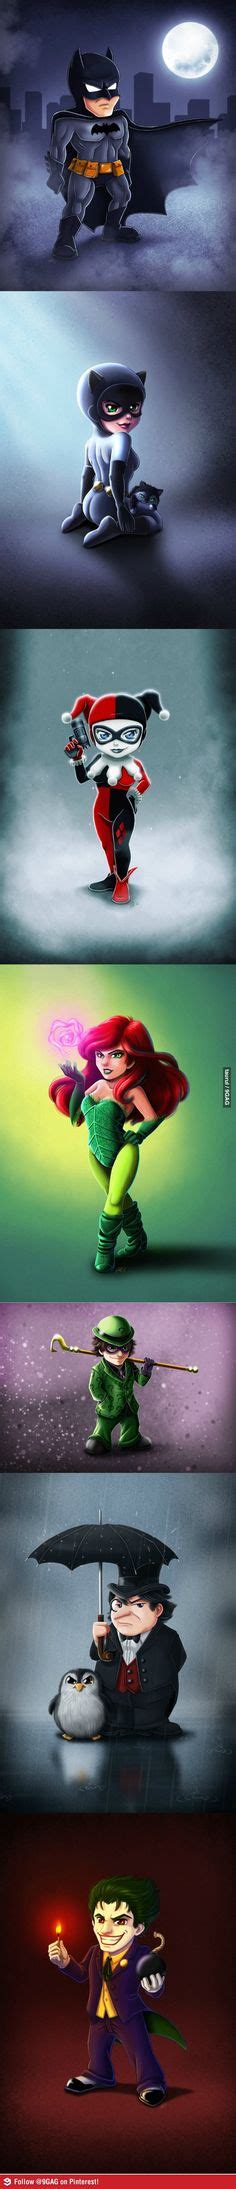 poison ivy batman animated series by gary anderson comic poison ivy pinterest poison